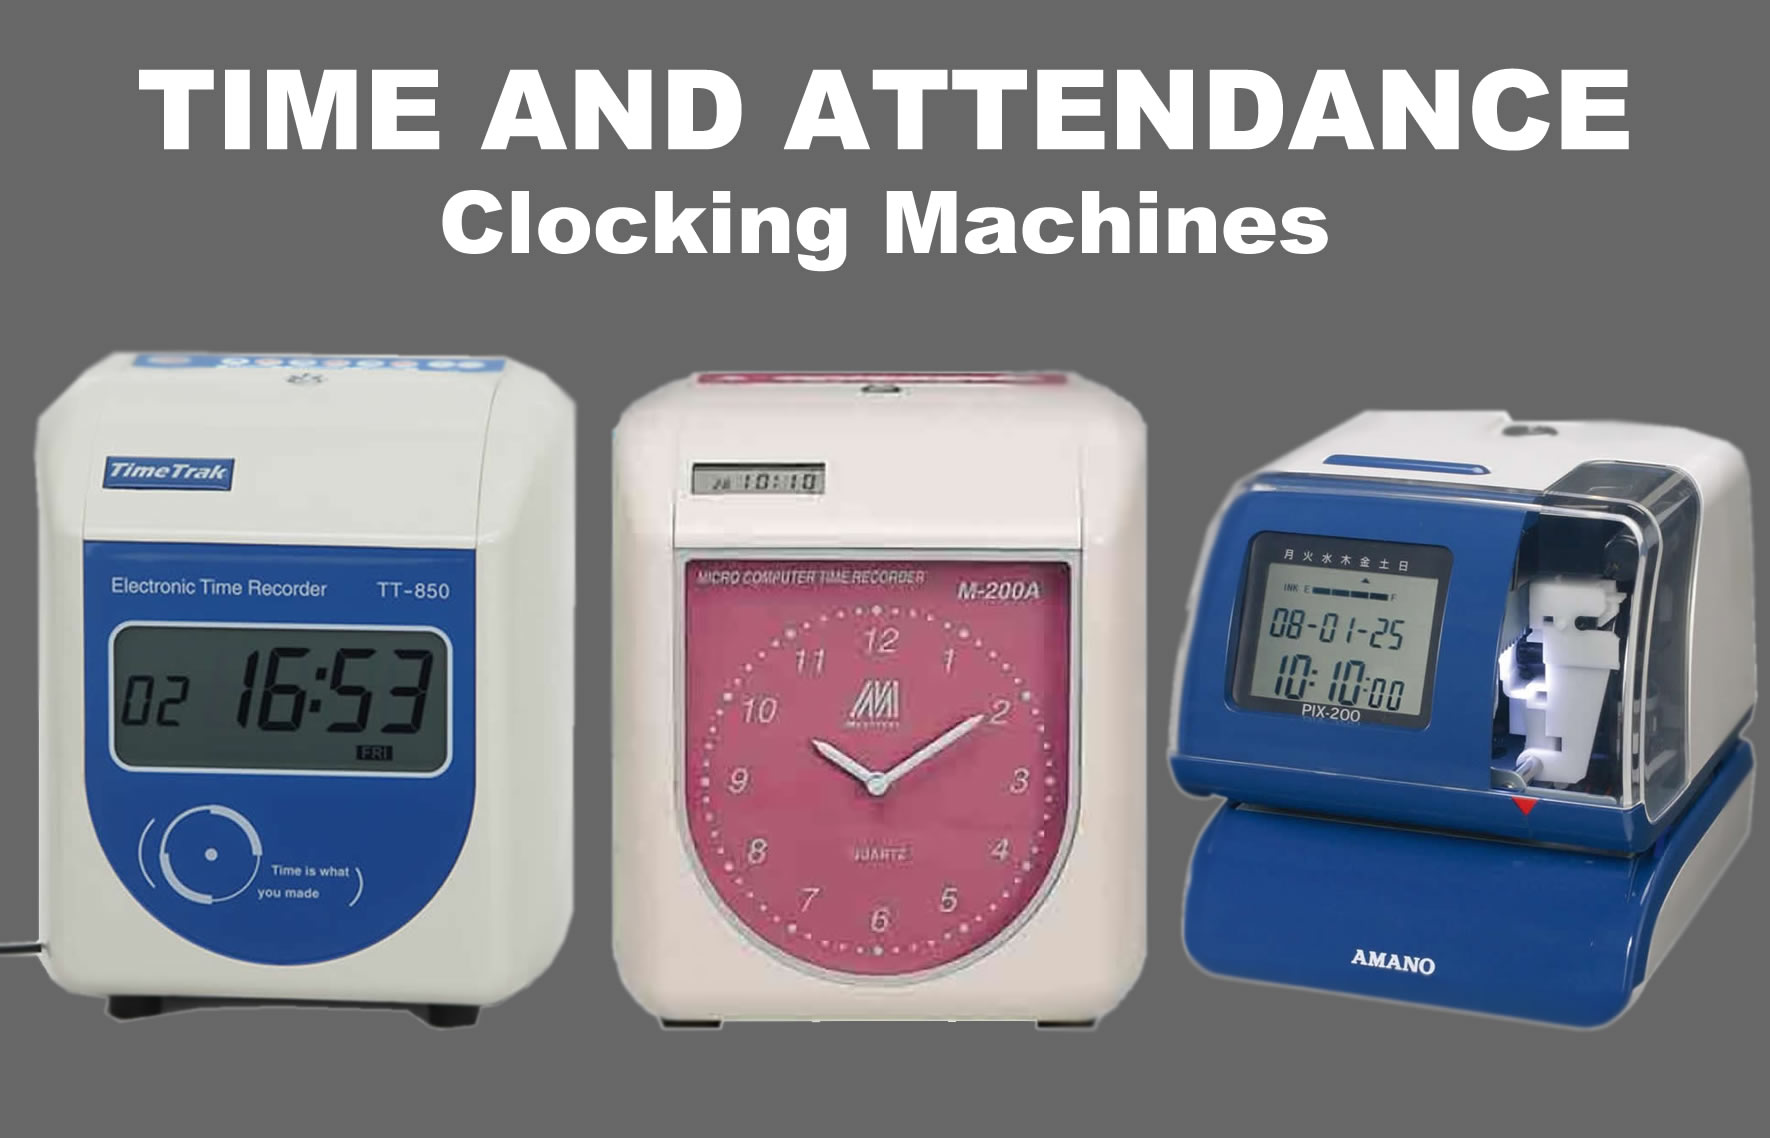 clocking machines - time and attendance